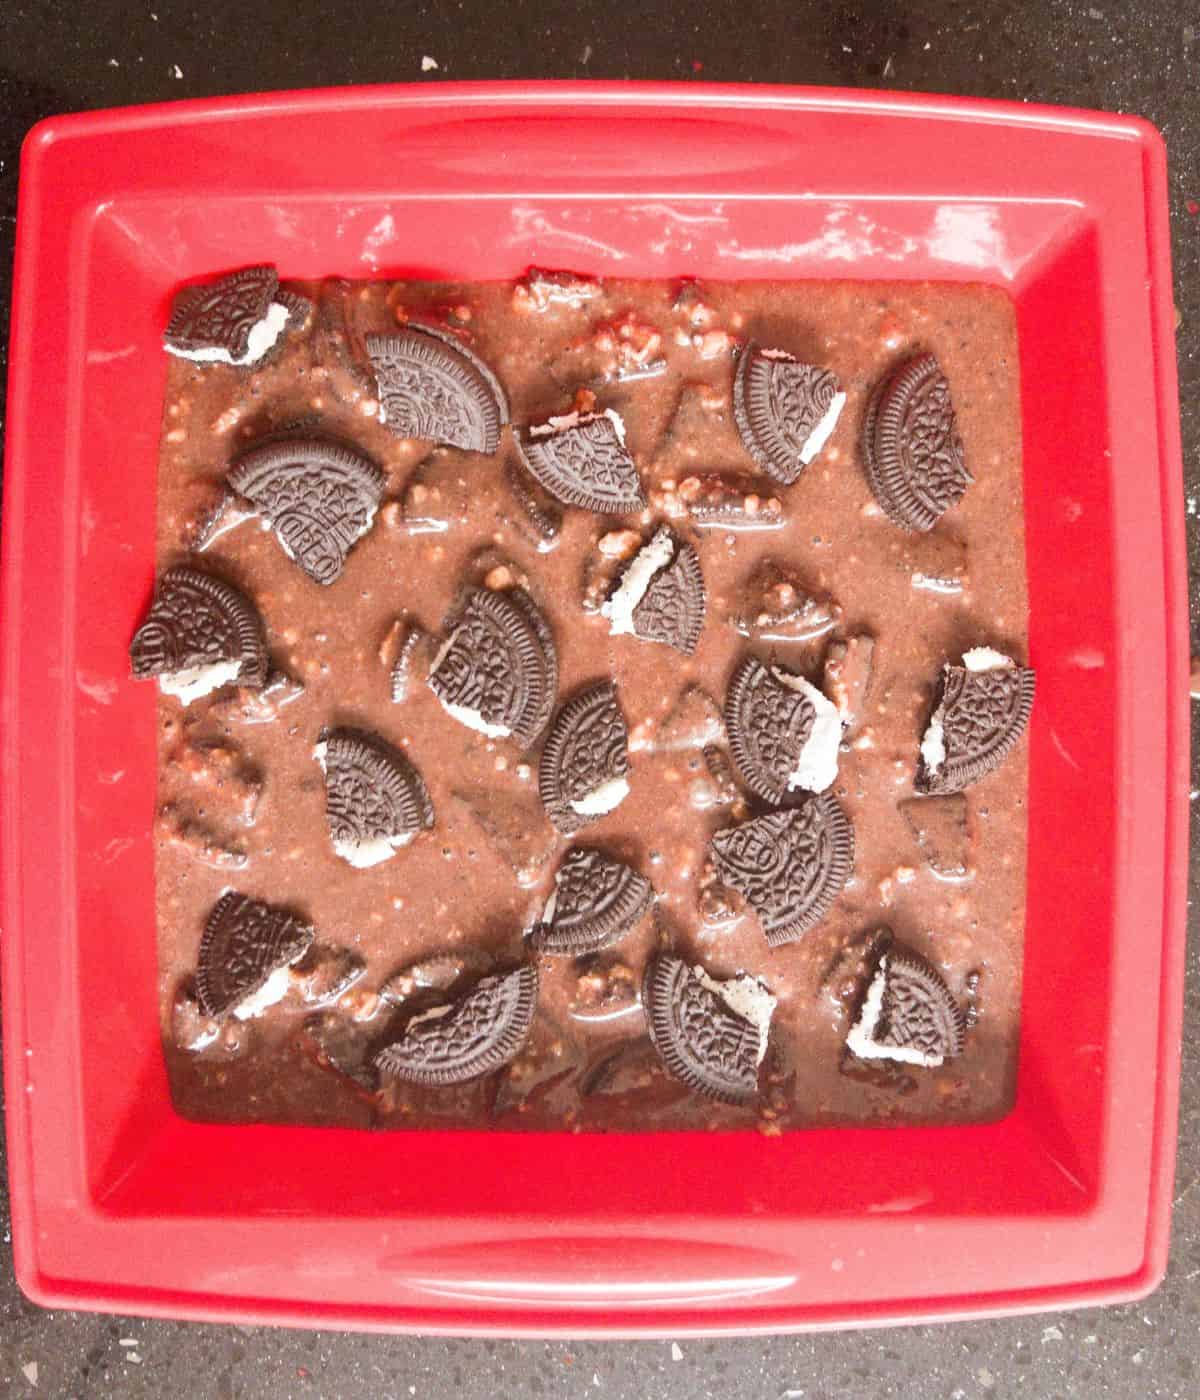 uncooked oreo brownie mixture in a red brownie baking tin.